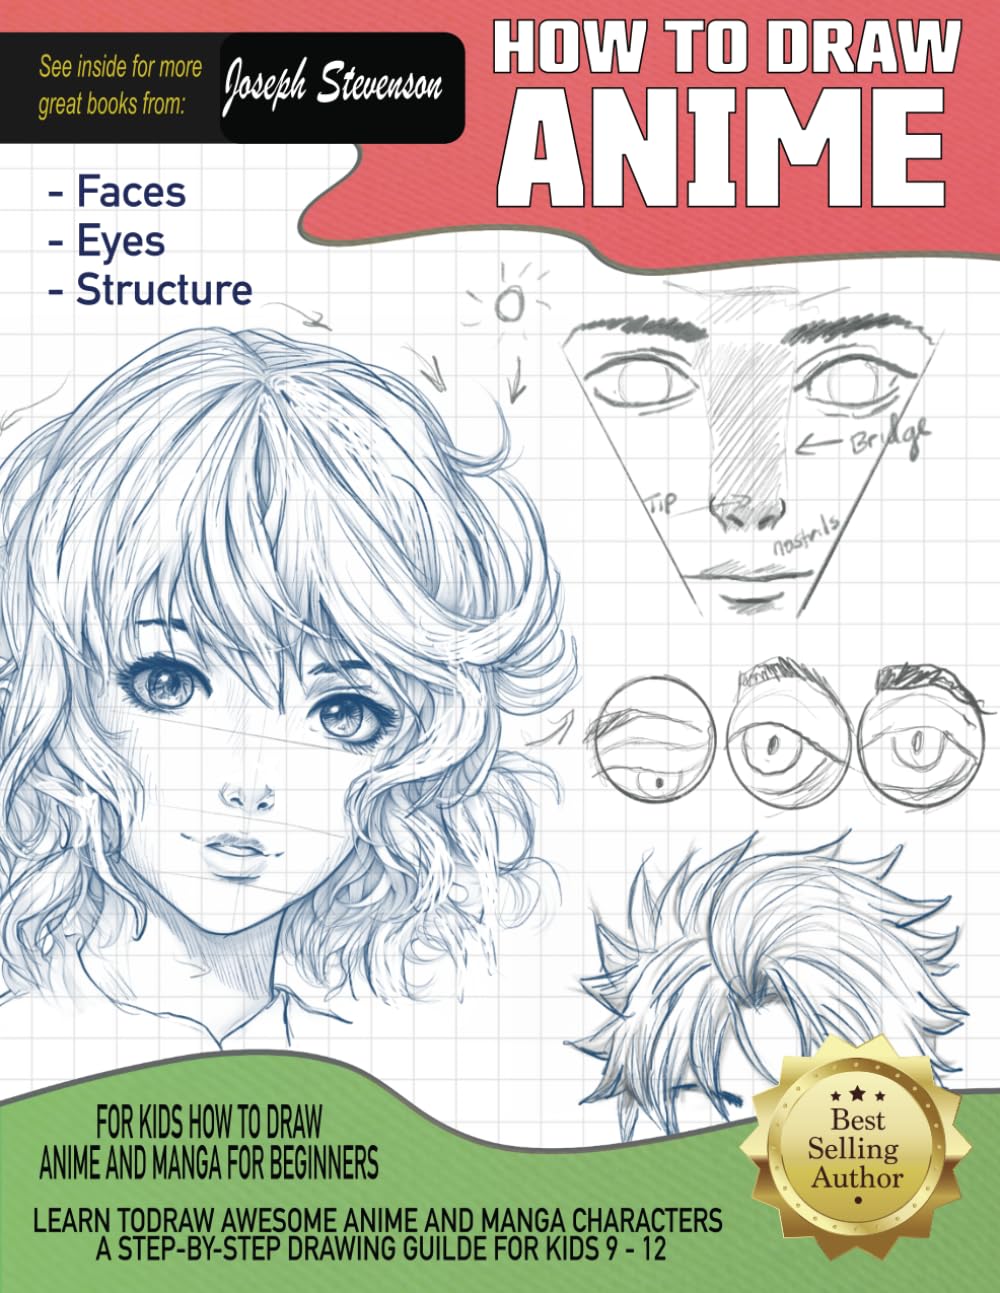 How to Draw Anime for Kids How to Draw Anime and Manga for Beginners: Learn to Draw Awesome Anime and Manga Characters A Step-by-Step Drawing Guide for Kids 9 - 12 (How to Draw Everything)